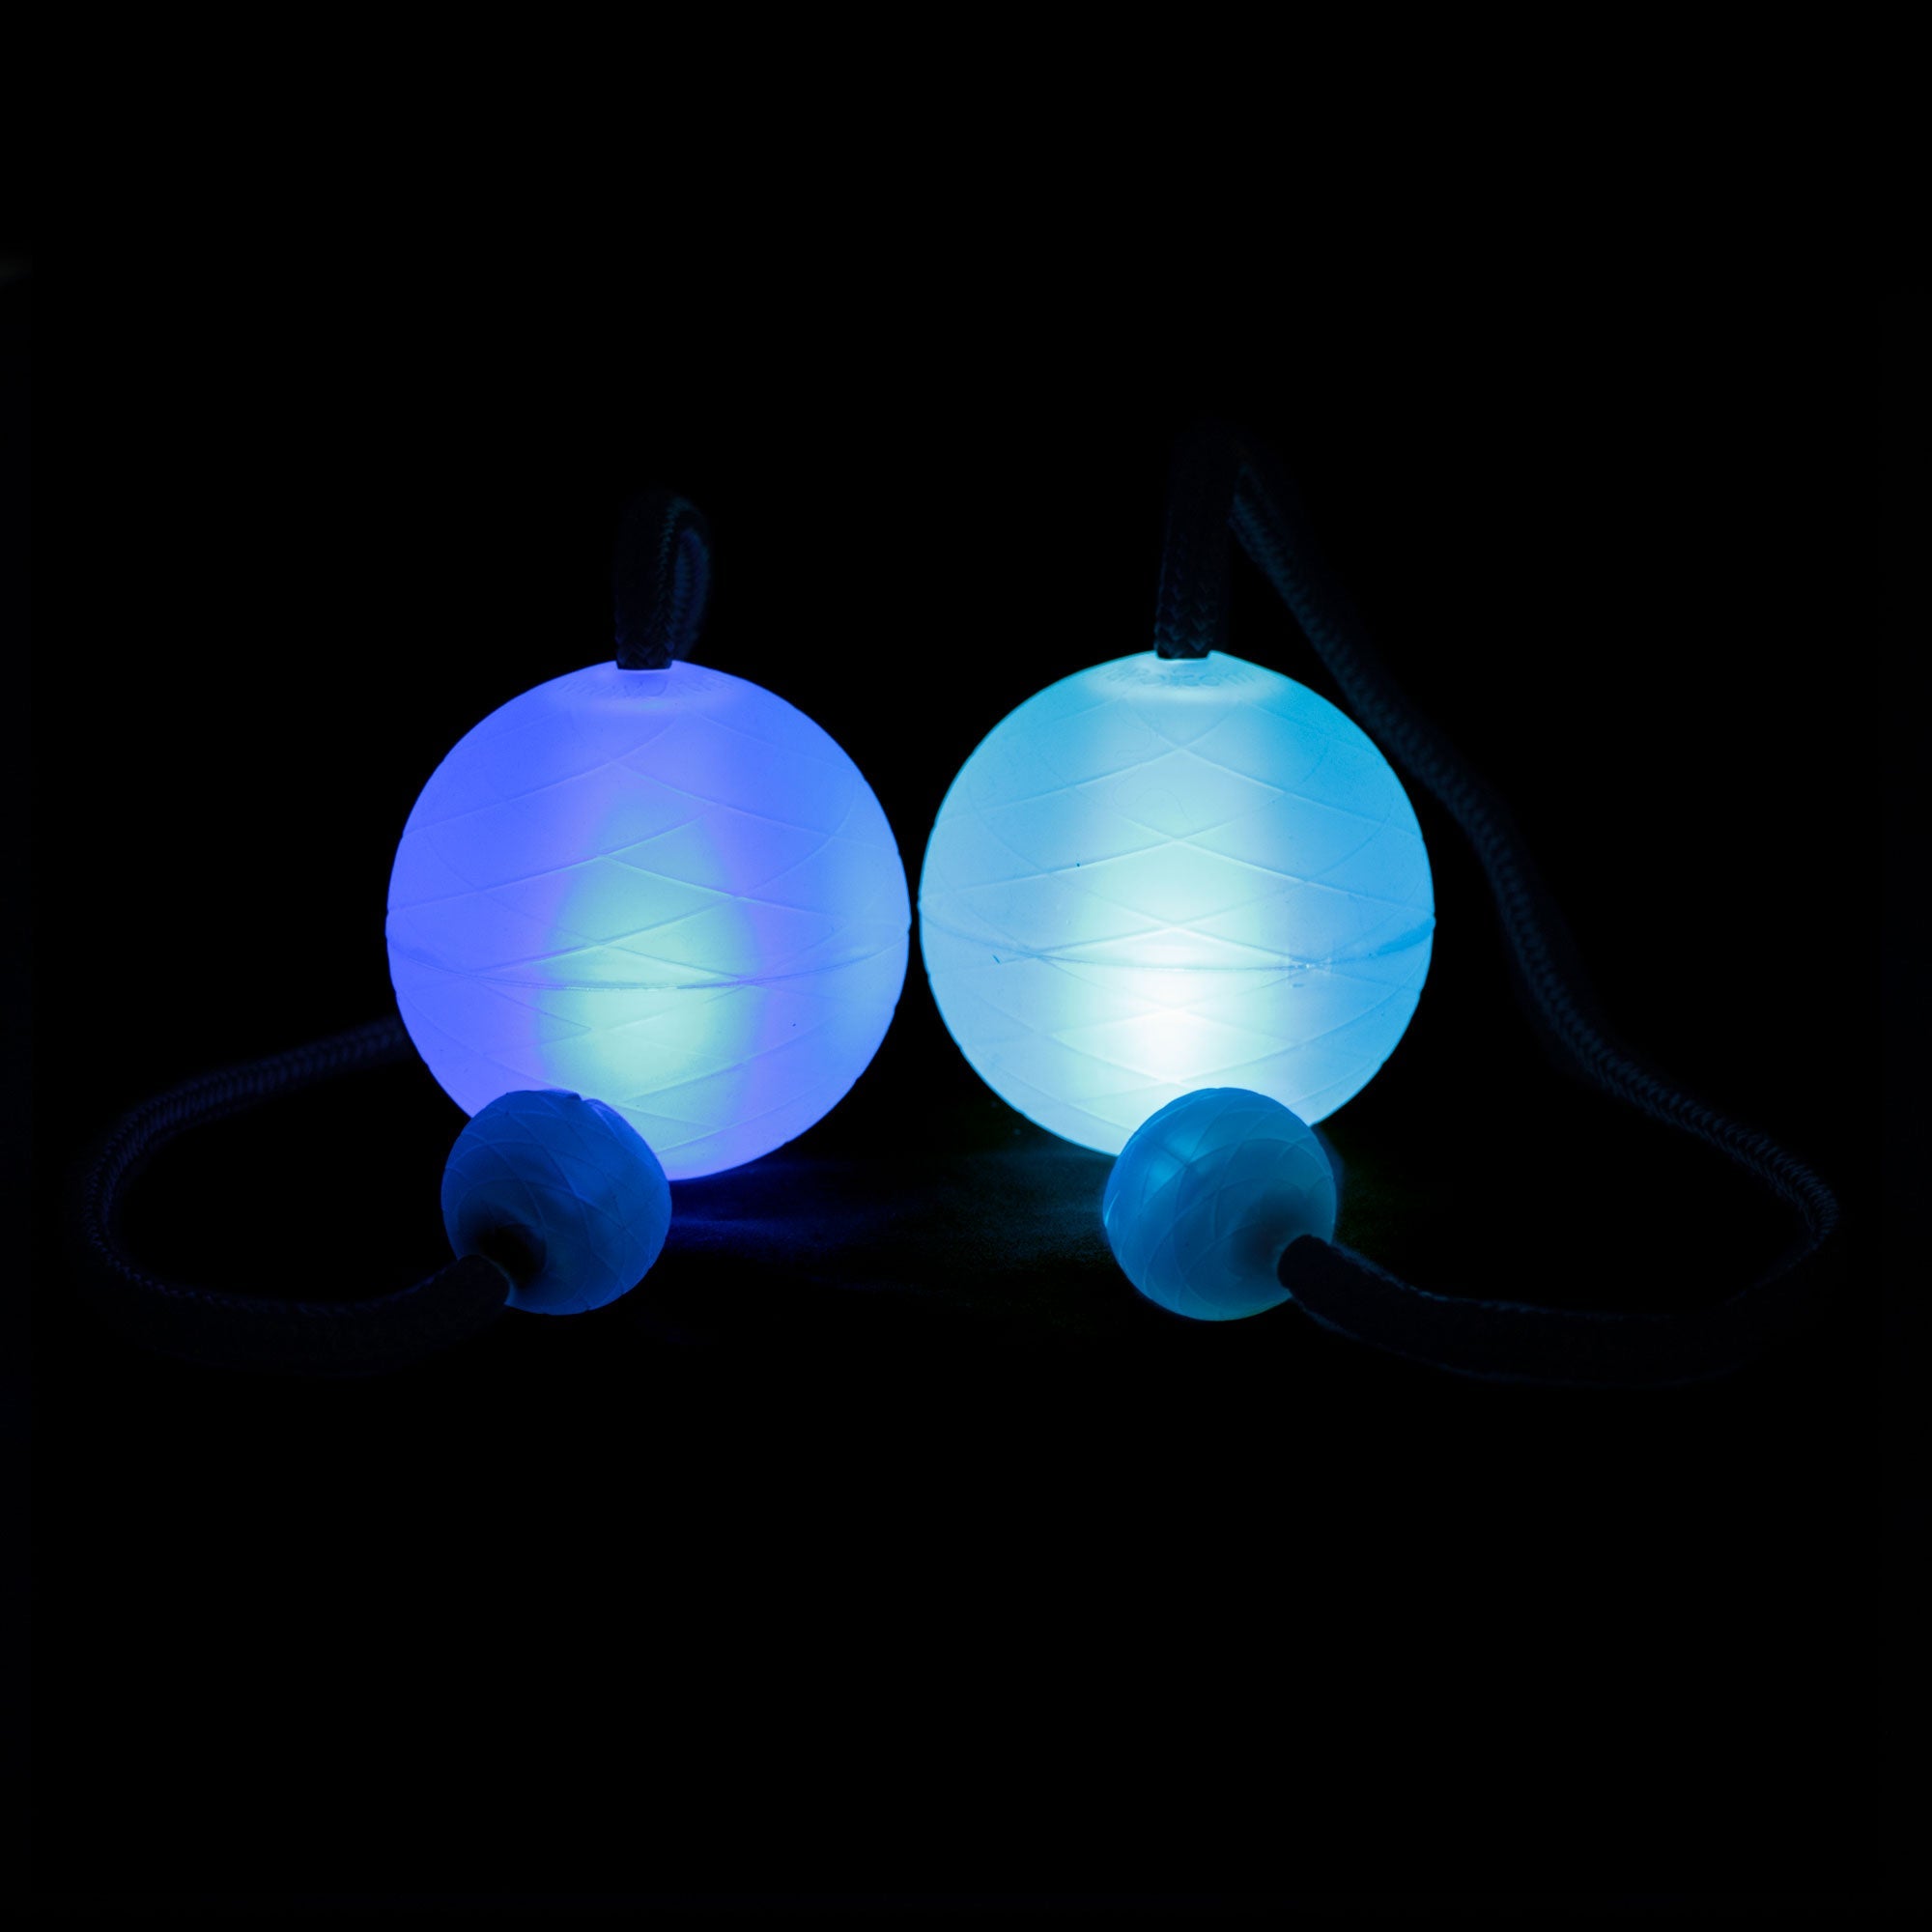 orbpoi glowing blue